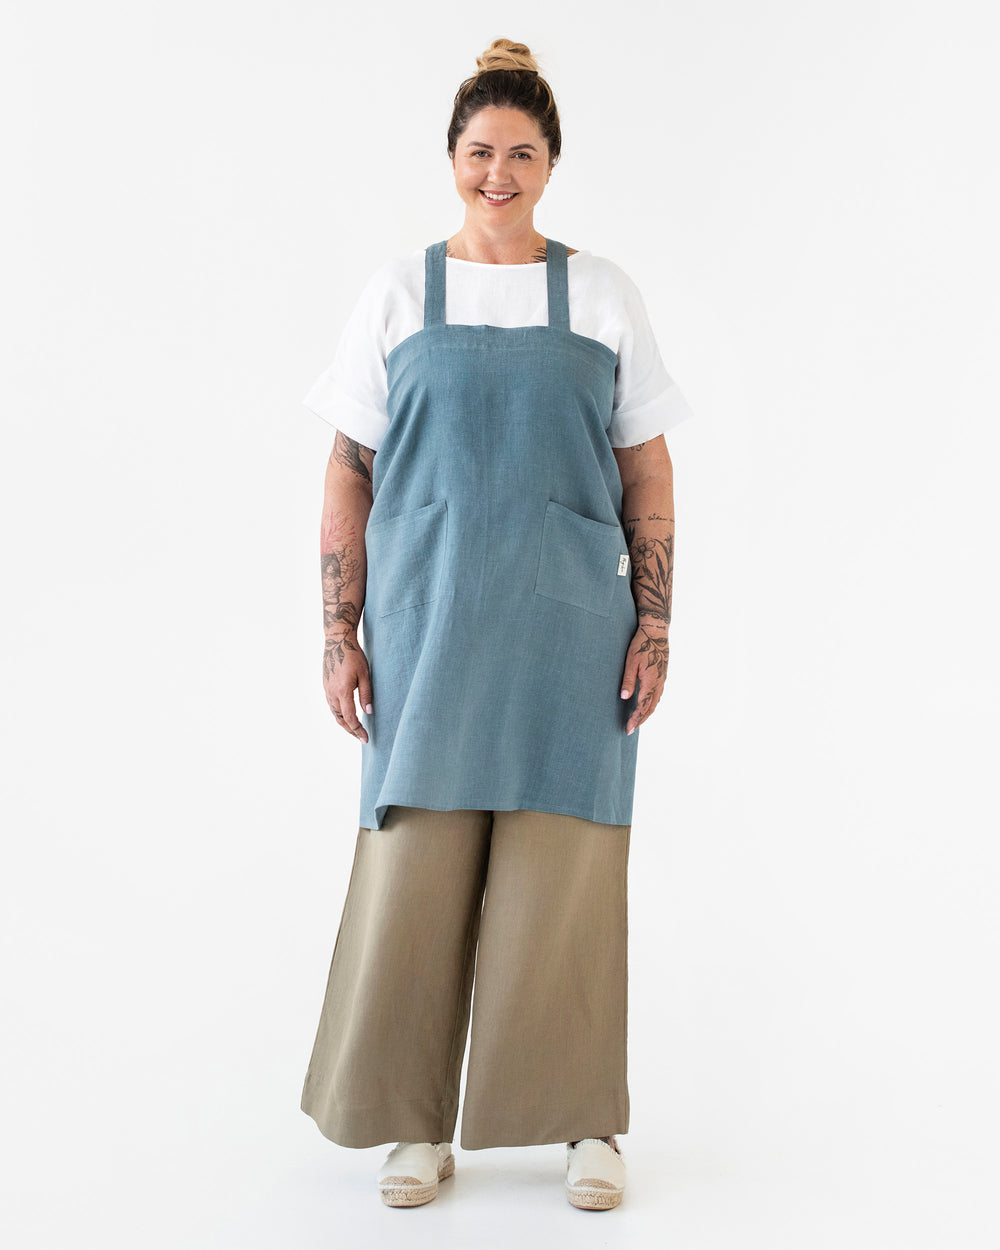 Linen No-Tie Cross Back Japanese Style Pinafore Apron with Two Pockets